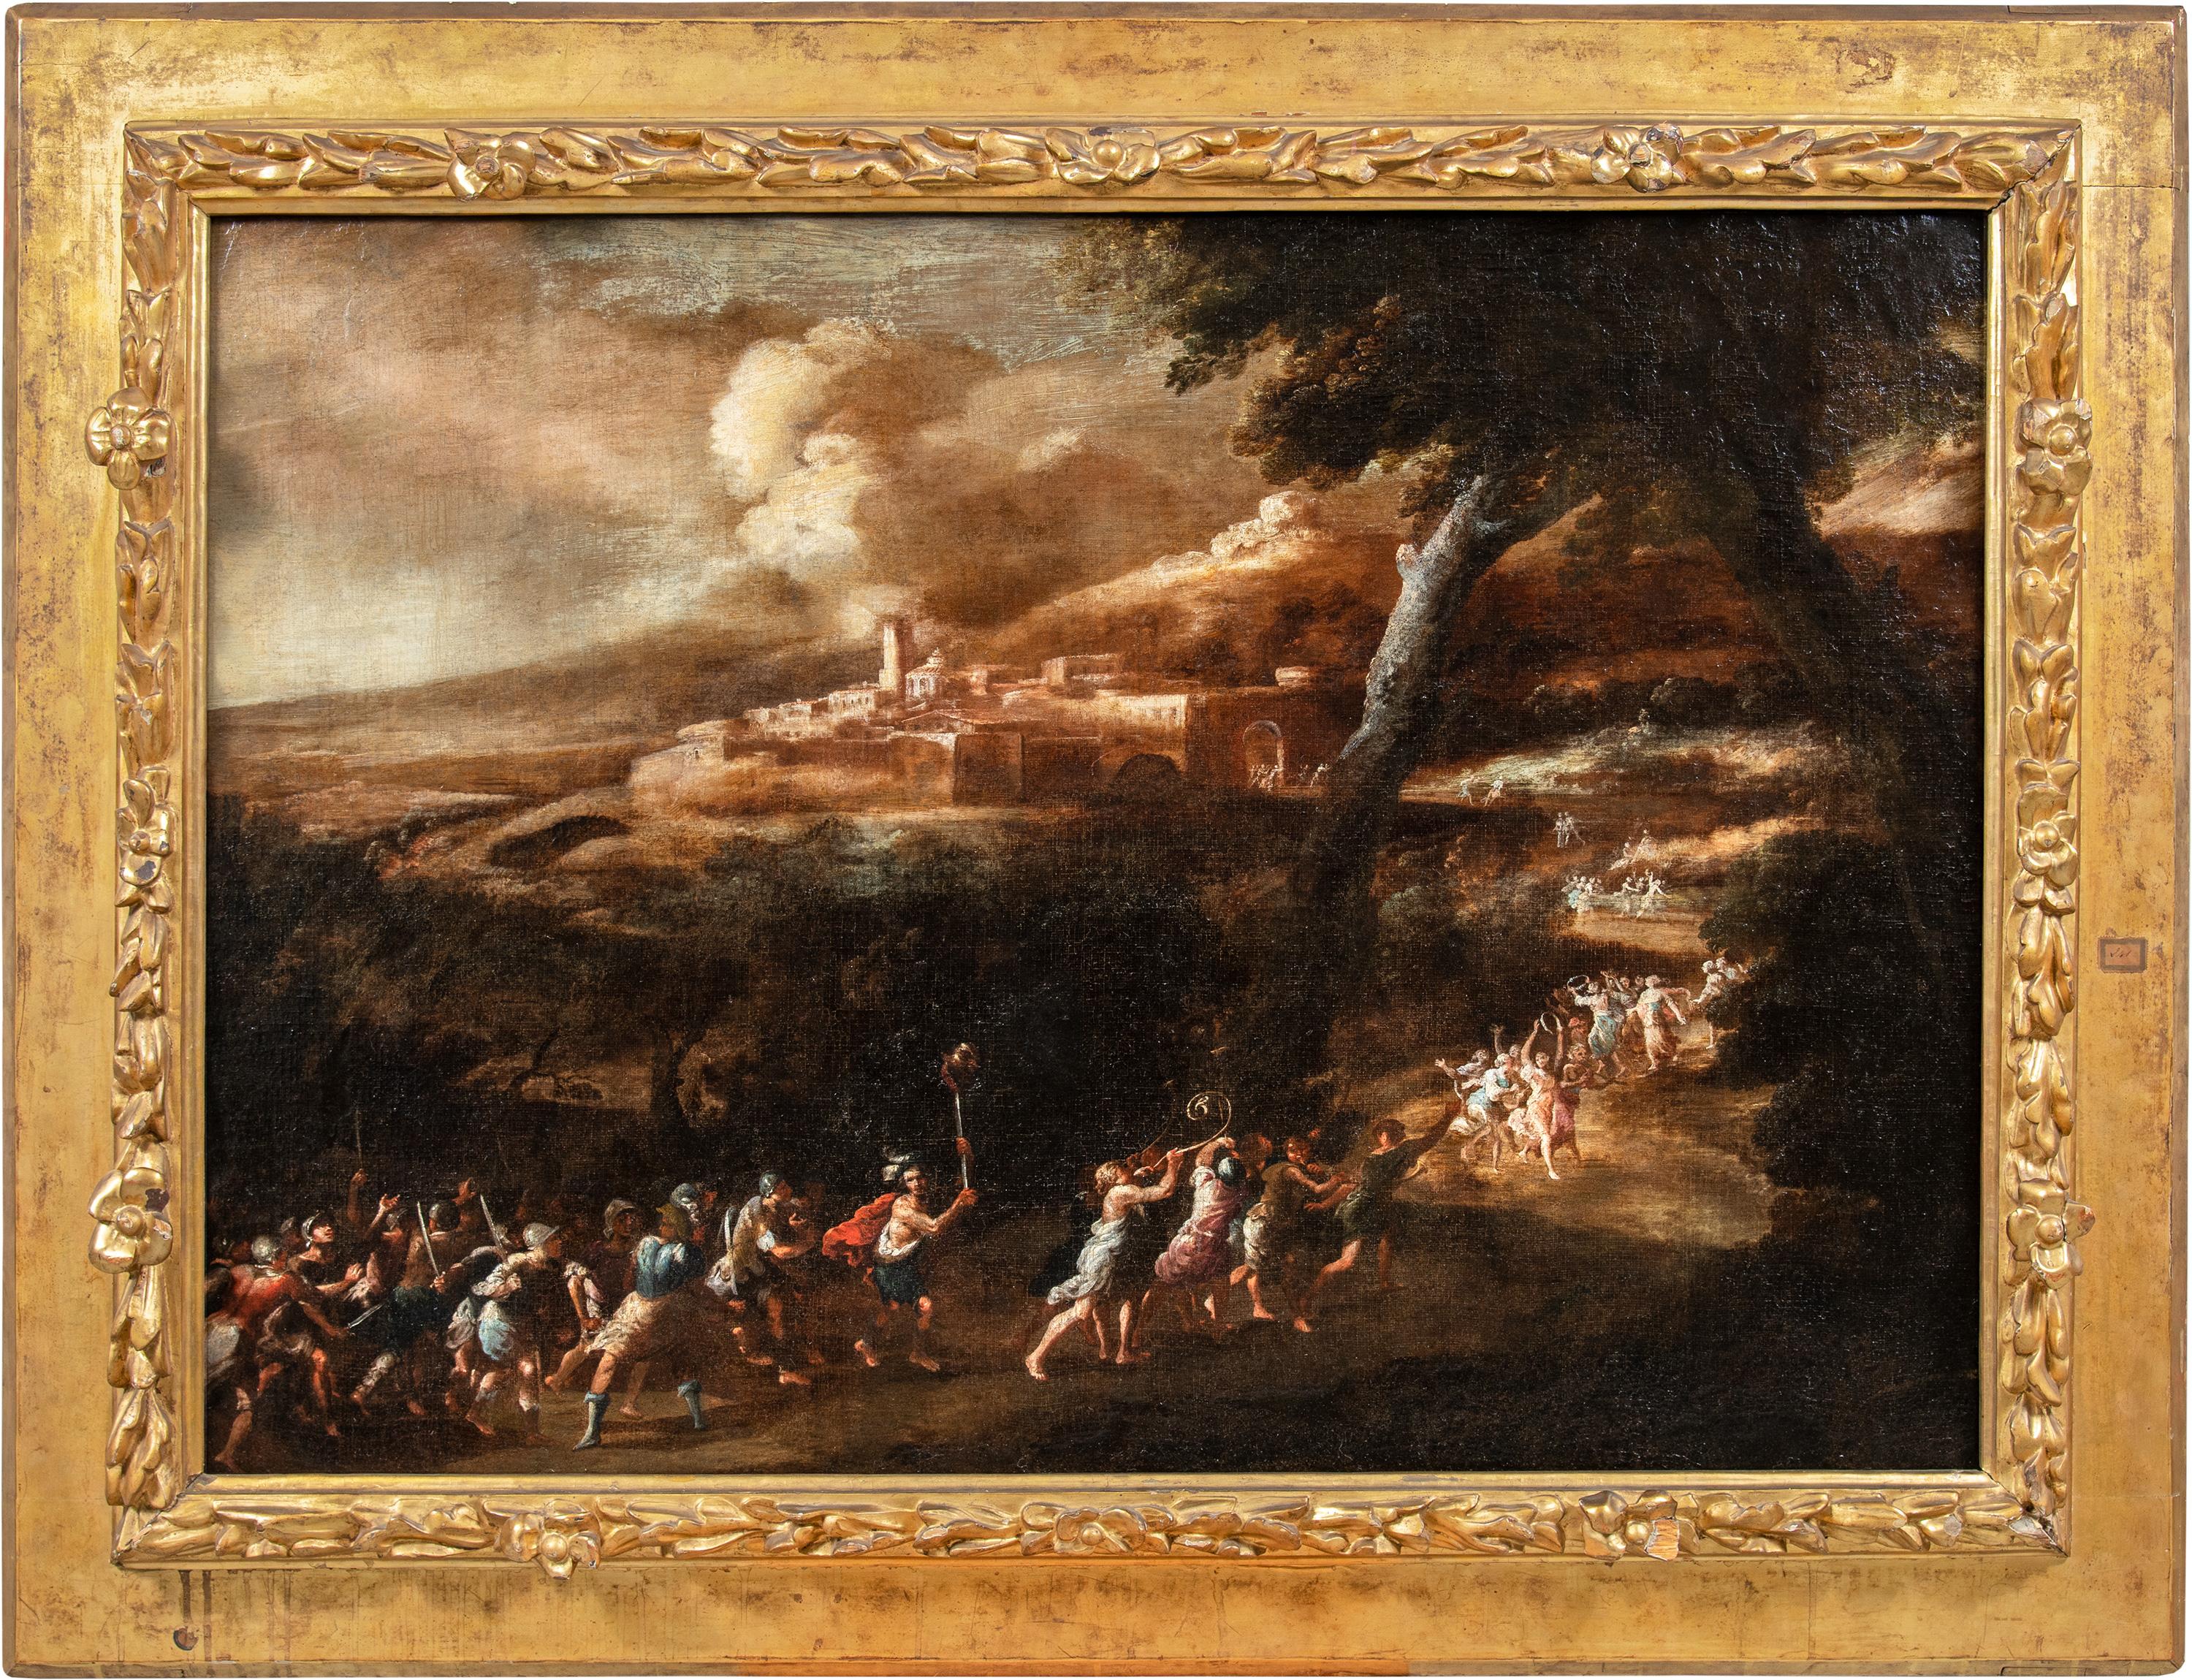 Scipione Compagno (Naples c. 1624 - Naples post 1680) - Triumph of David.

86 x 121 cm without frame, 111 x 145 cm with frame.

Oil on canvas, in carved and gilded wooden frame.

Ancient oil painting on canvas, in a richly carved and gilded wooden